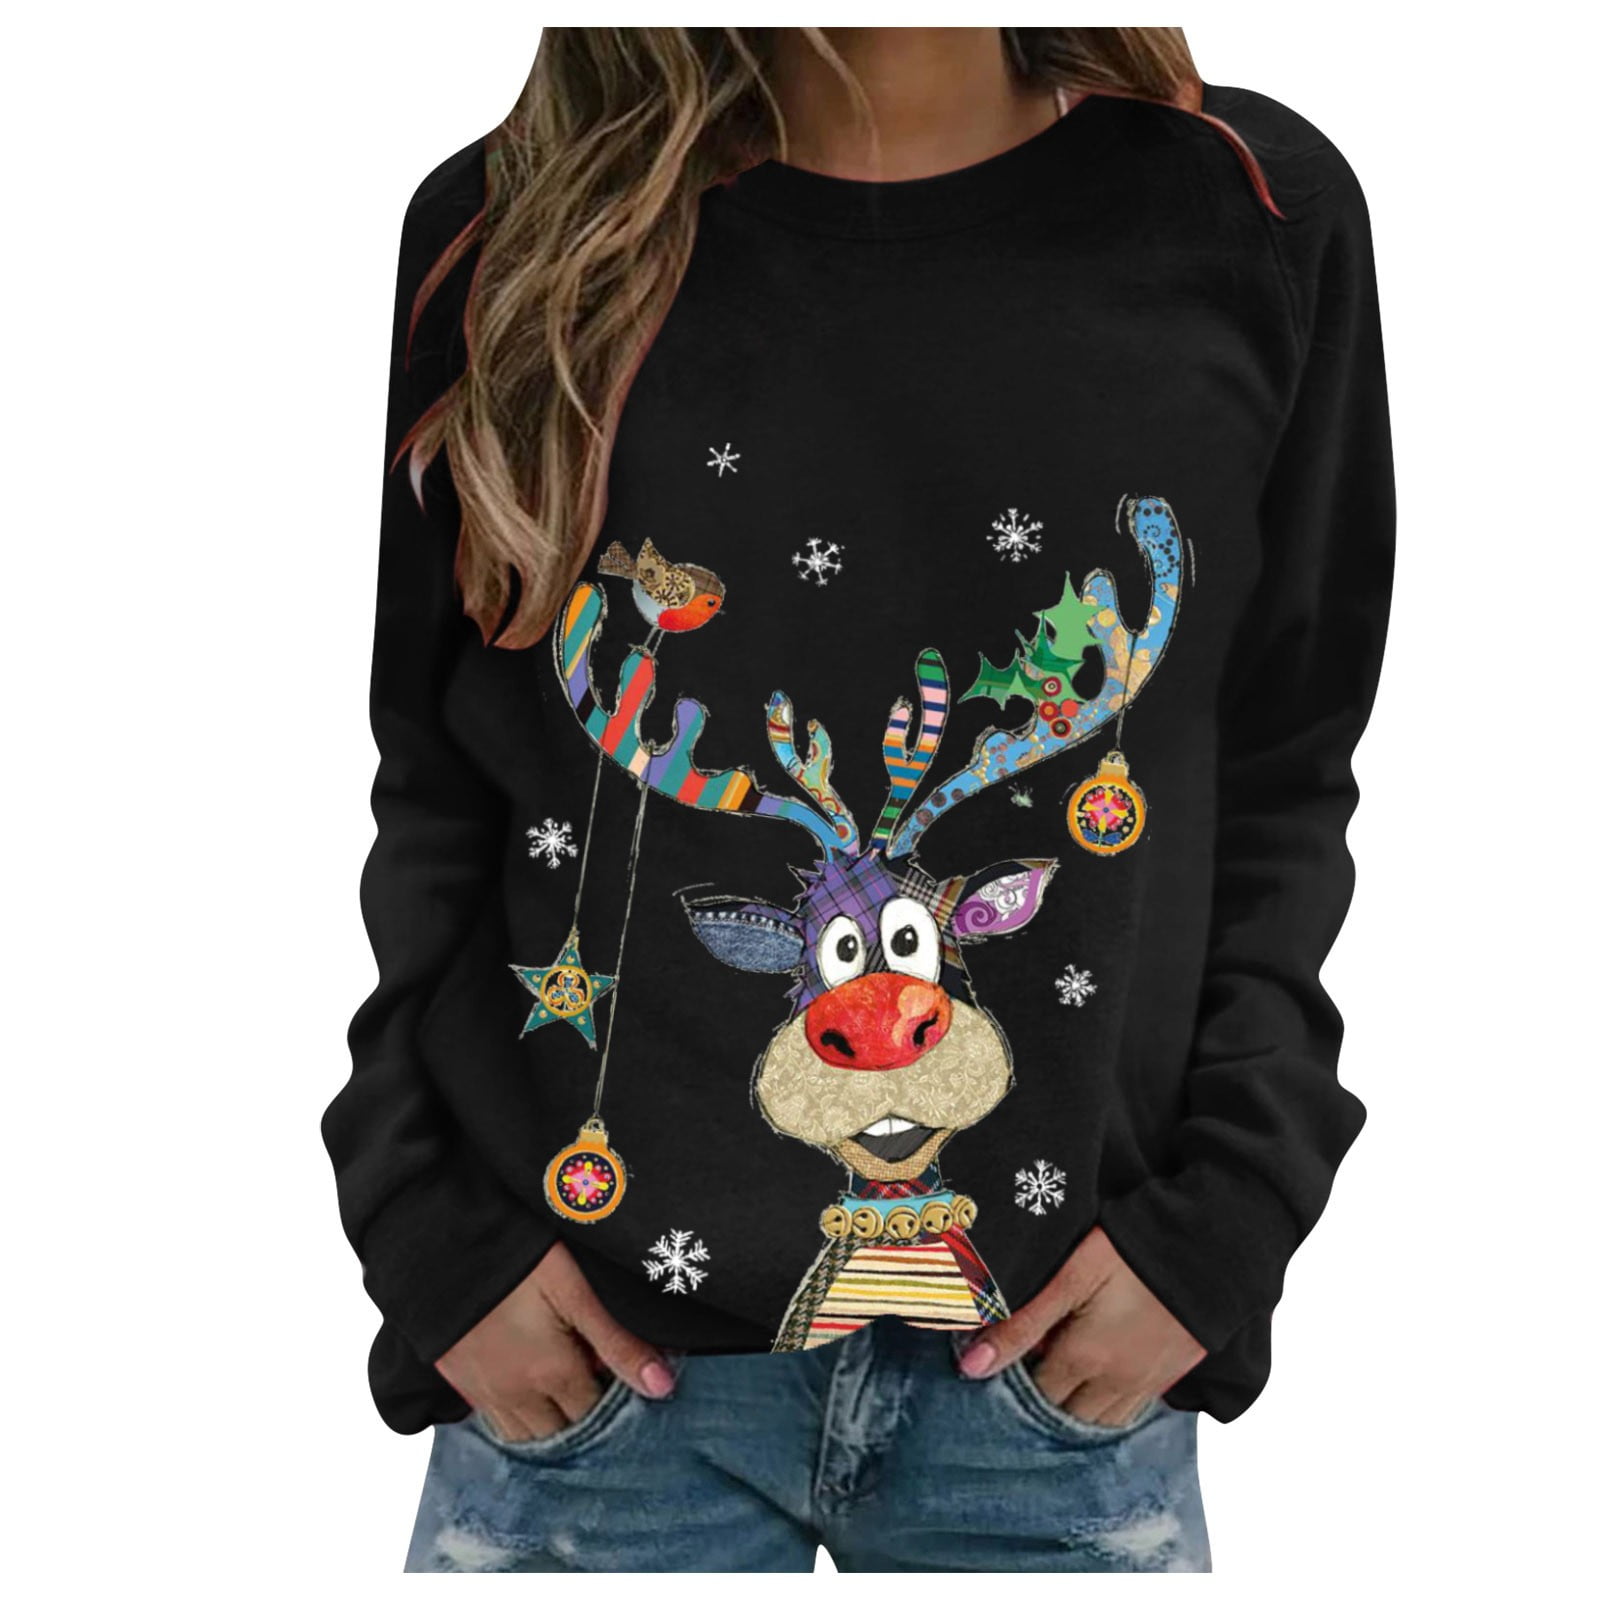 ❤️ Women/'s Christmas T-Shirt Xmas Blouse Ladies Casual Party Tunic Tops Pullover